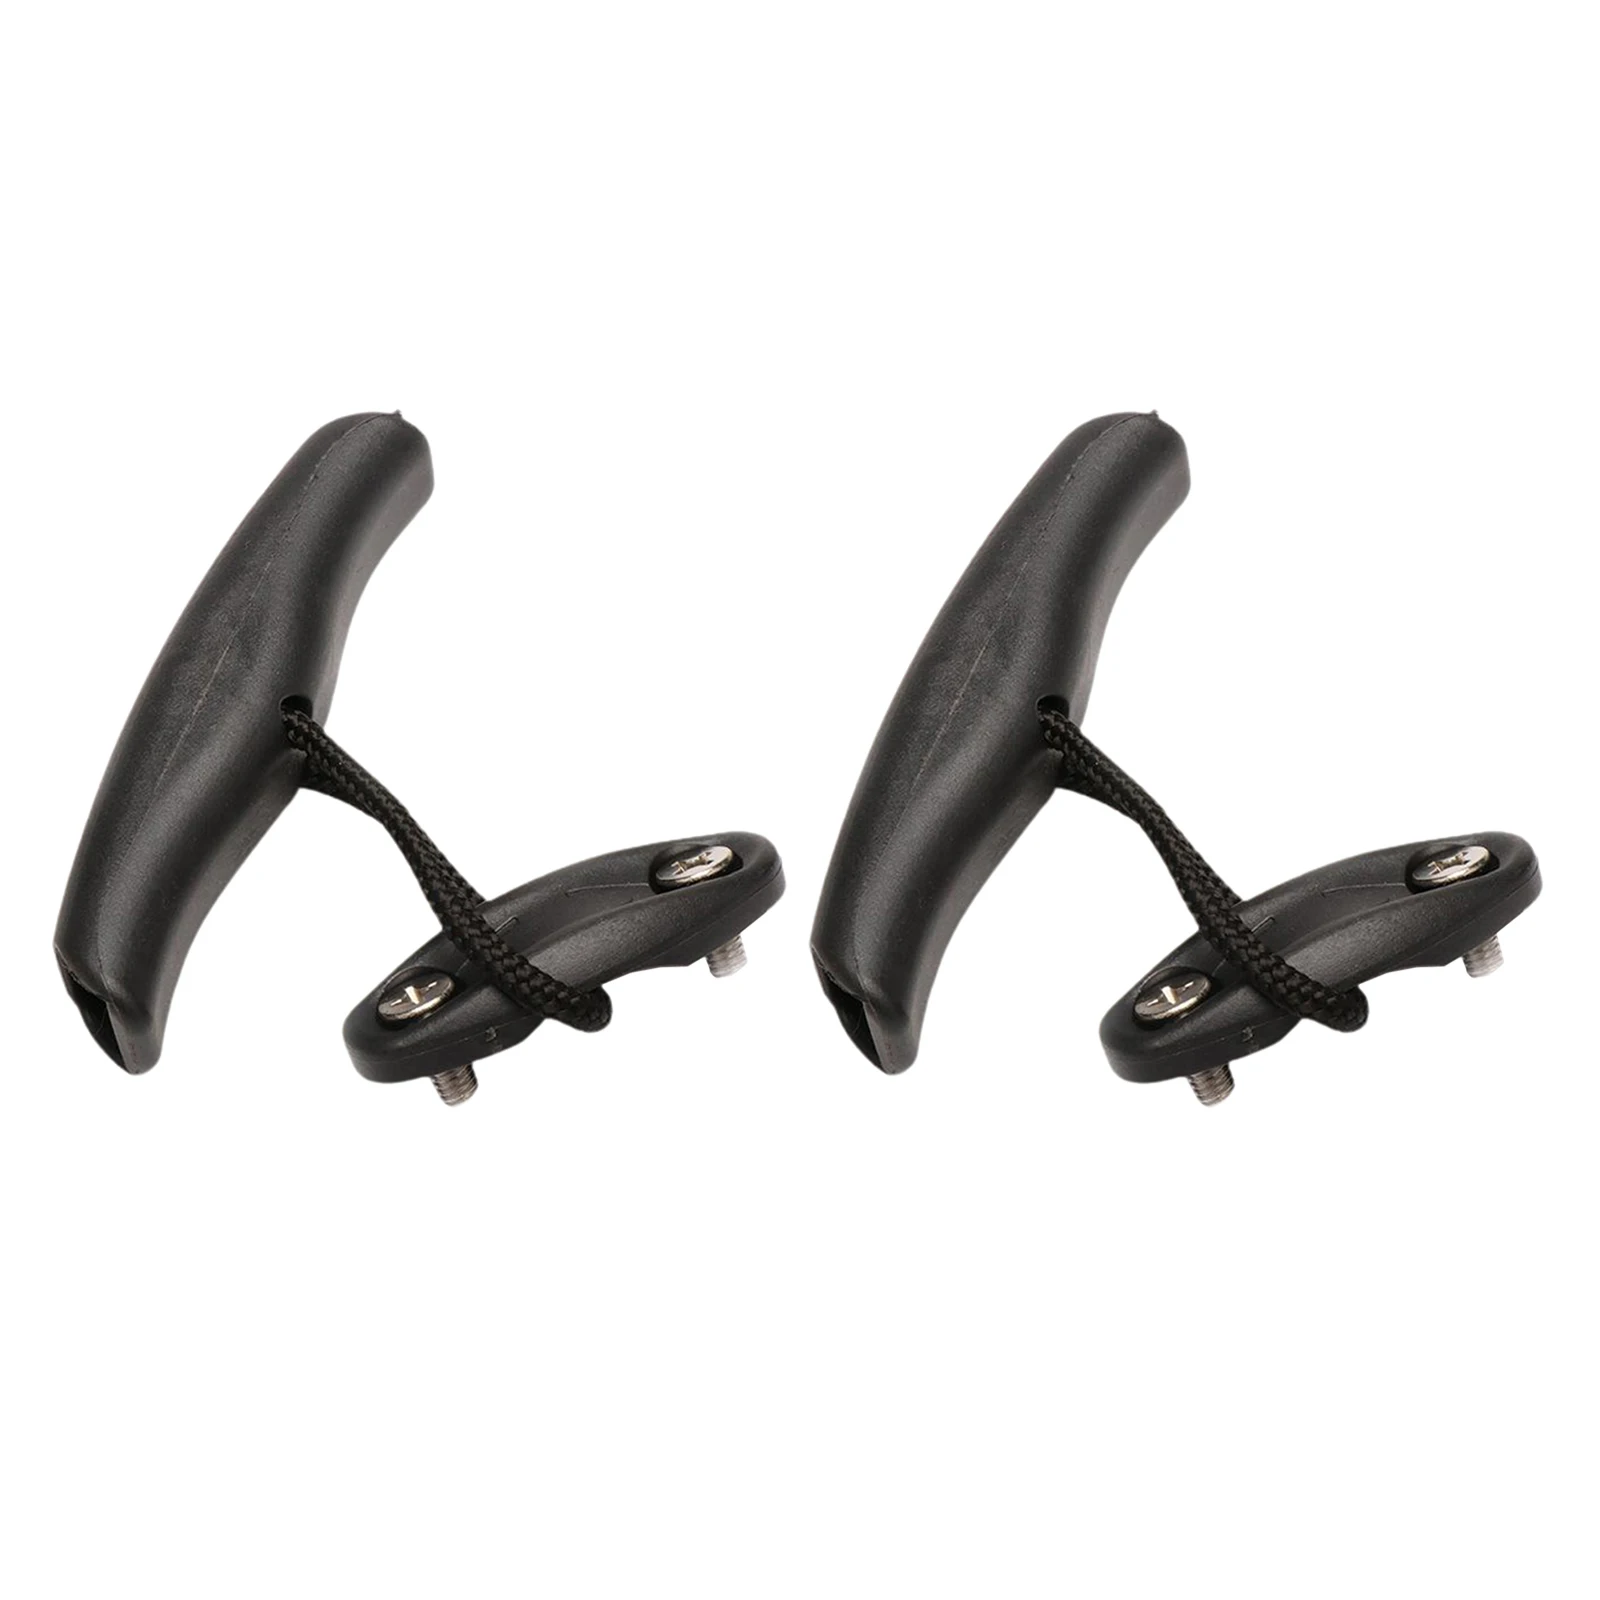 2x Nylon Kayak Pull Handle Canoe Boat Side/Top Mounted Carry T-Handle Toggle